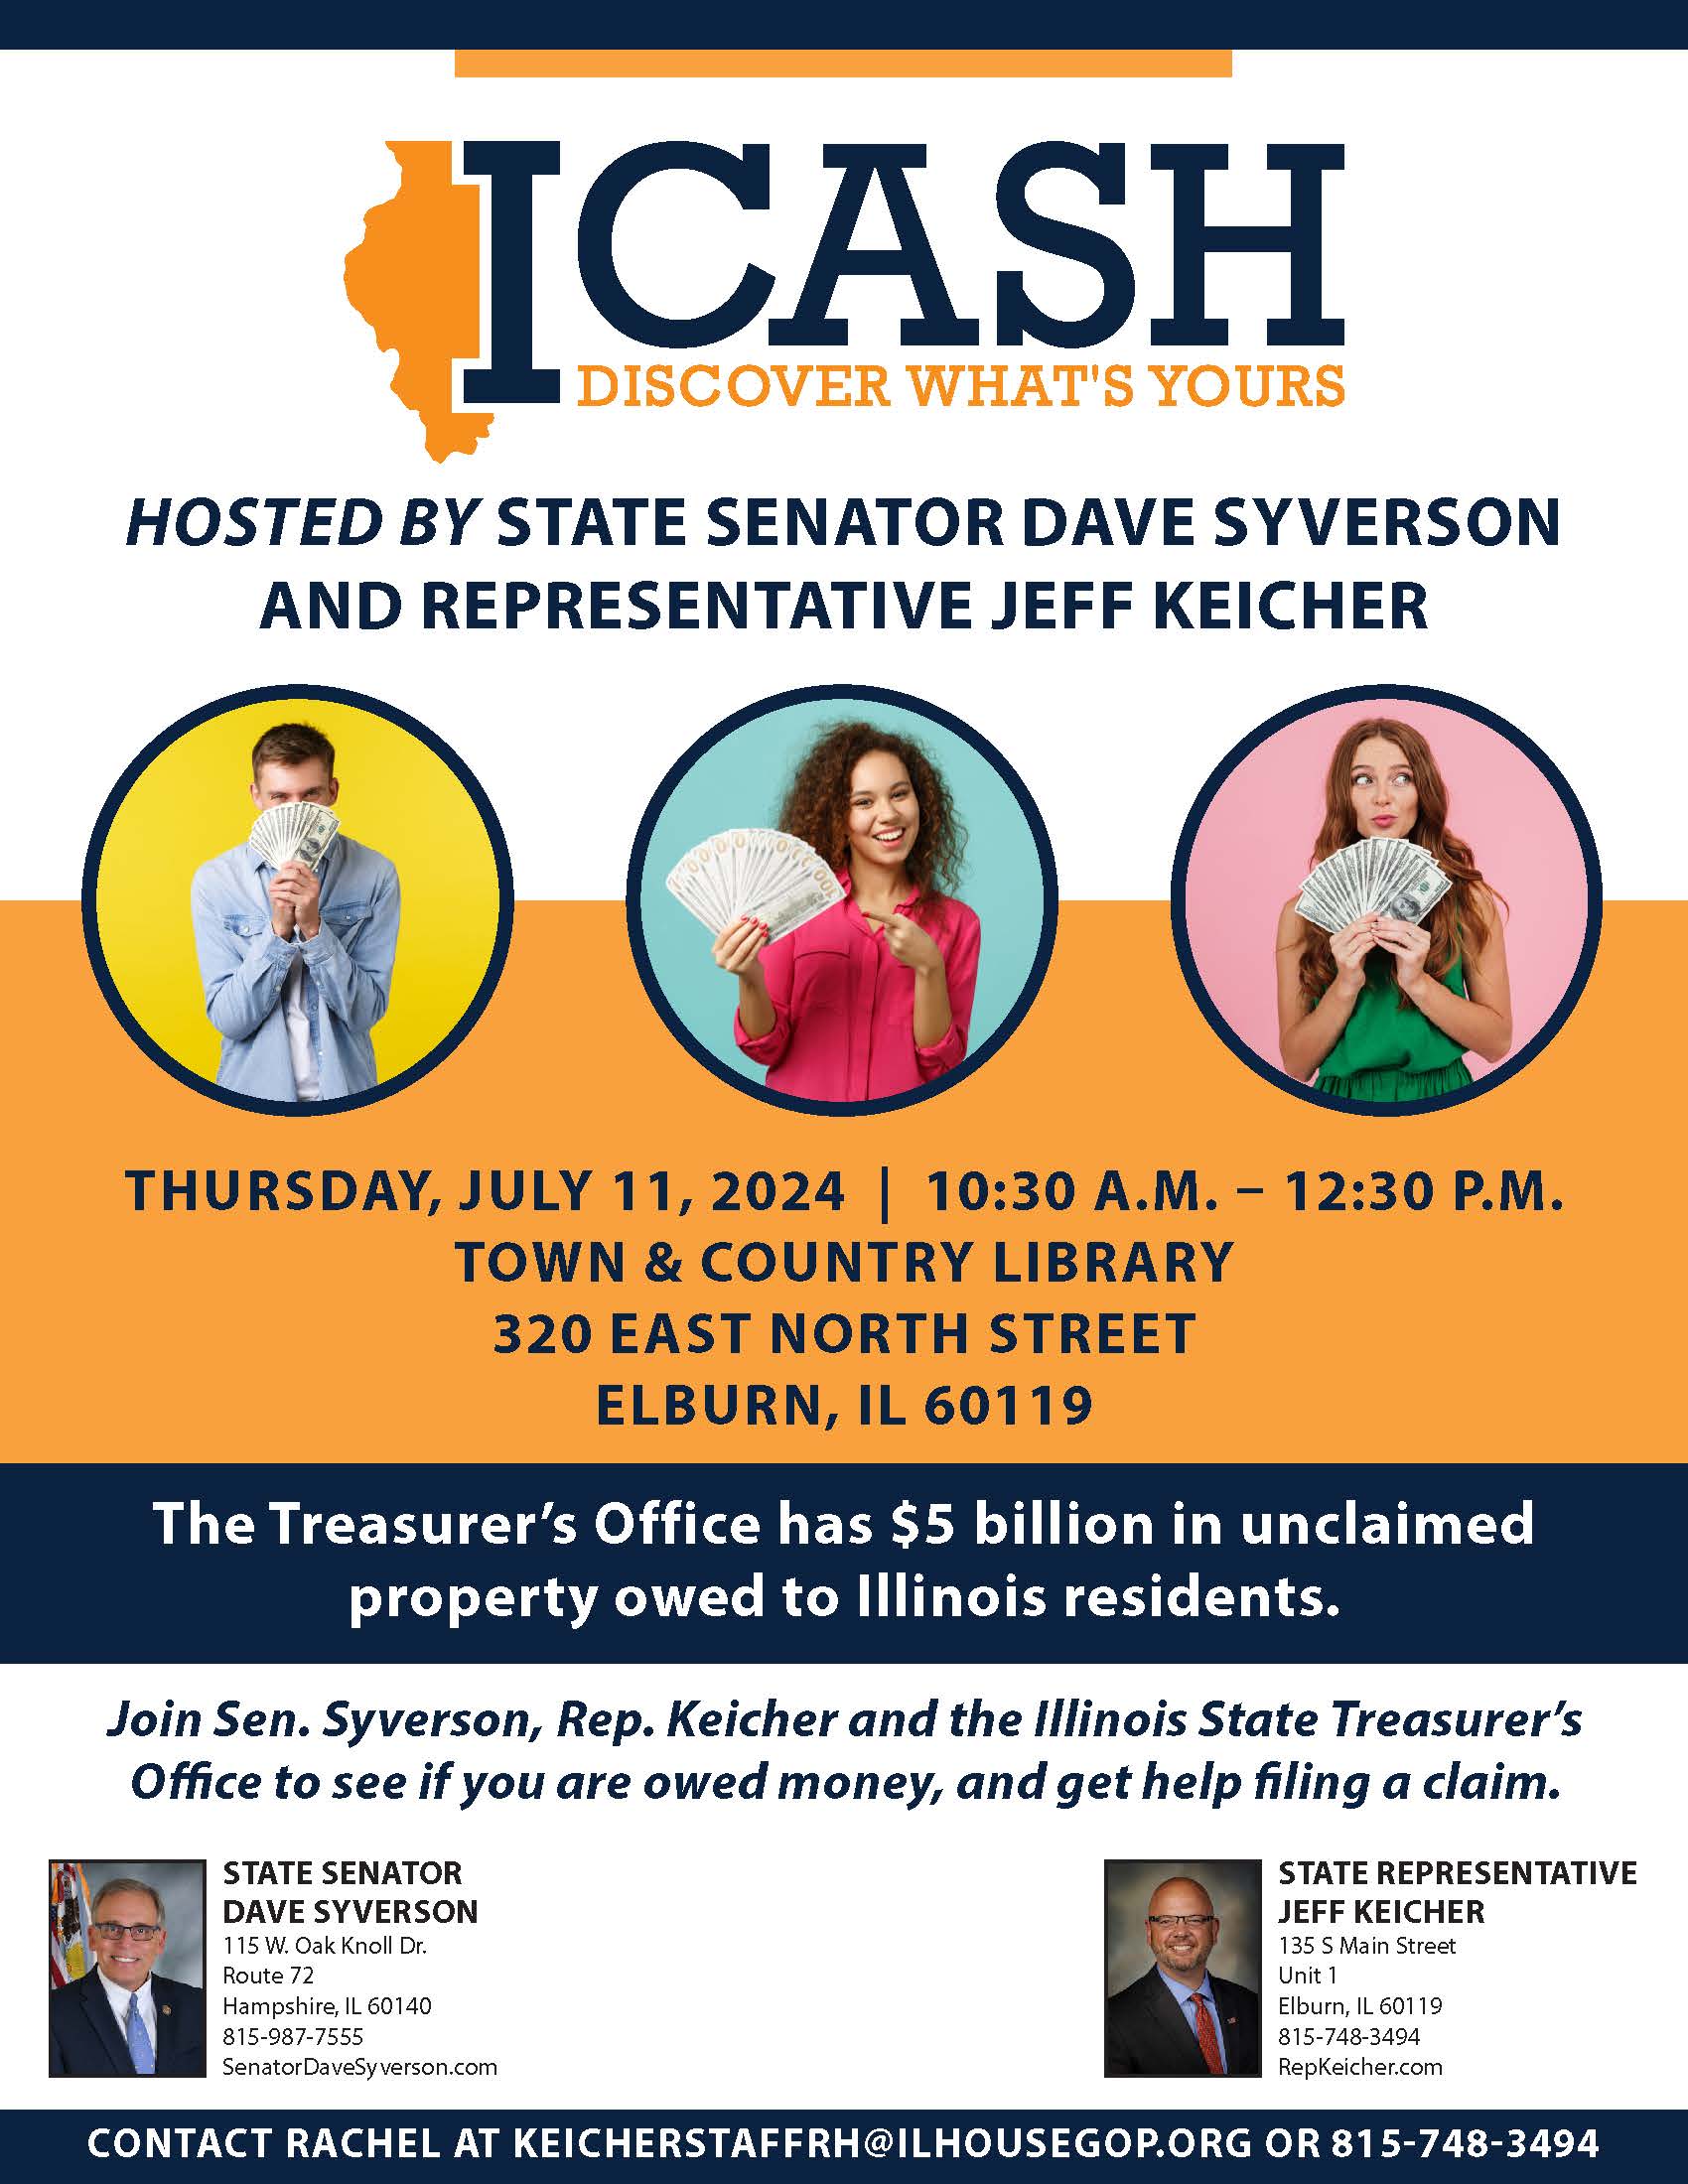 ICASH! Discover What’s Yours July 11 in Elburn!